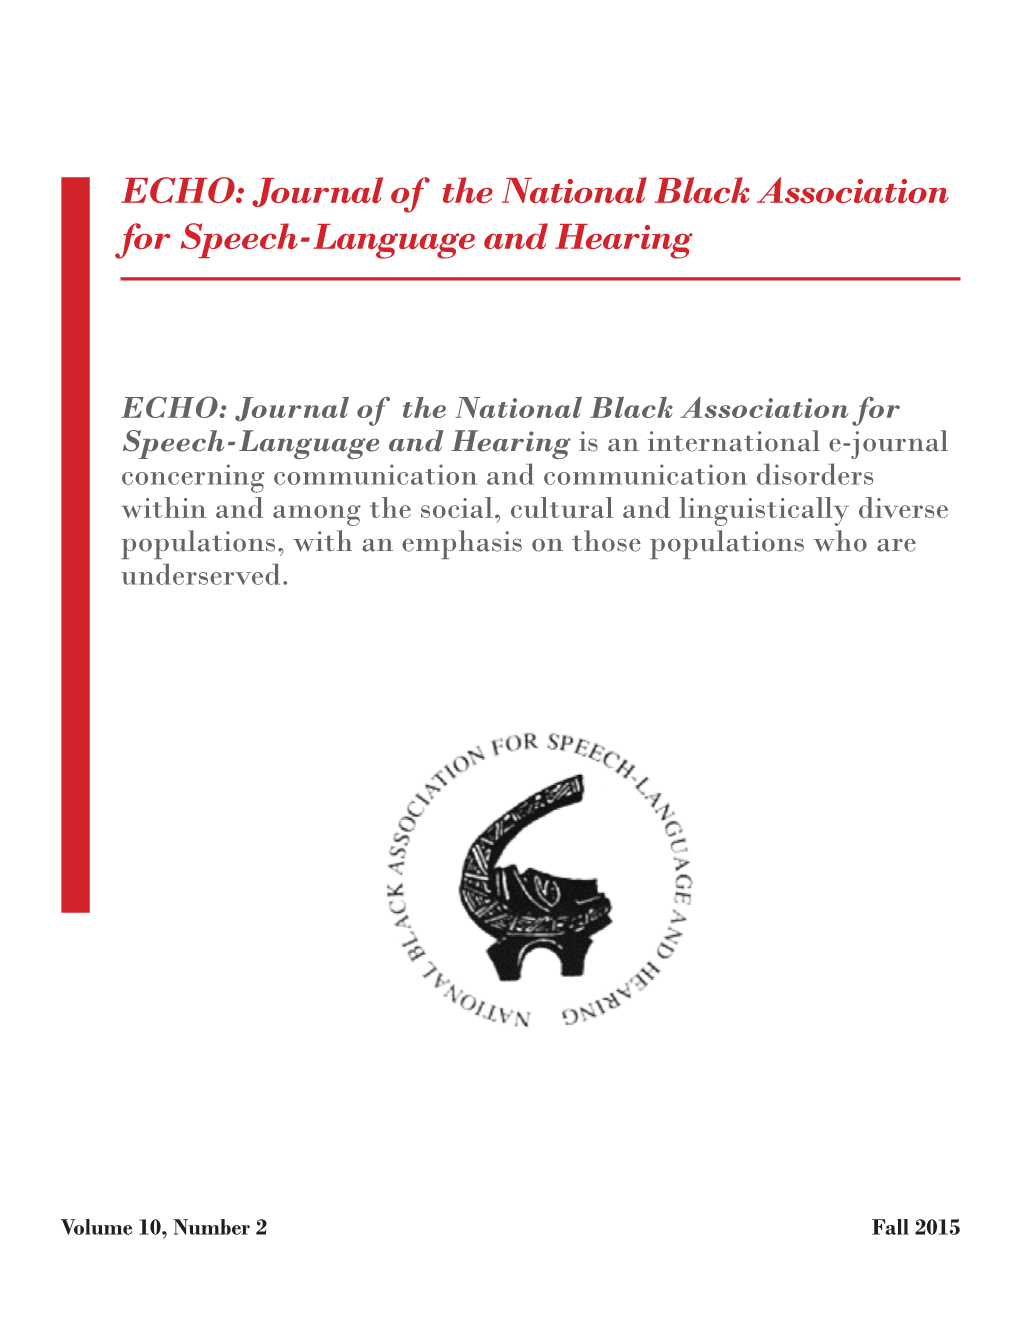 ECHO: Journal of the National Black Association for Speech-Language and Hearing